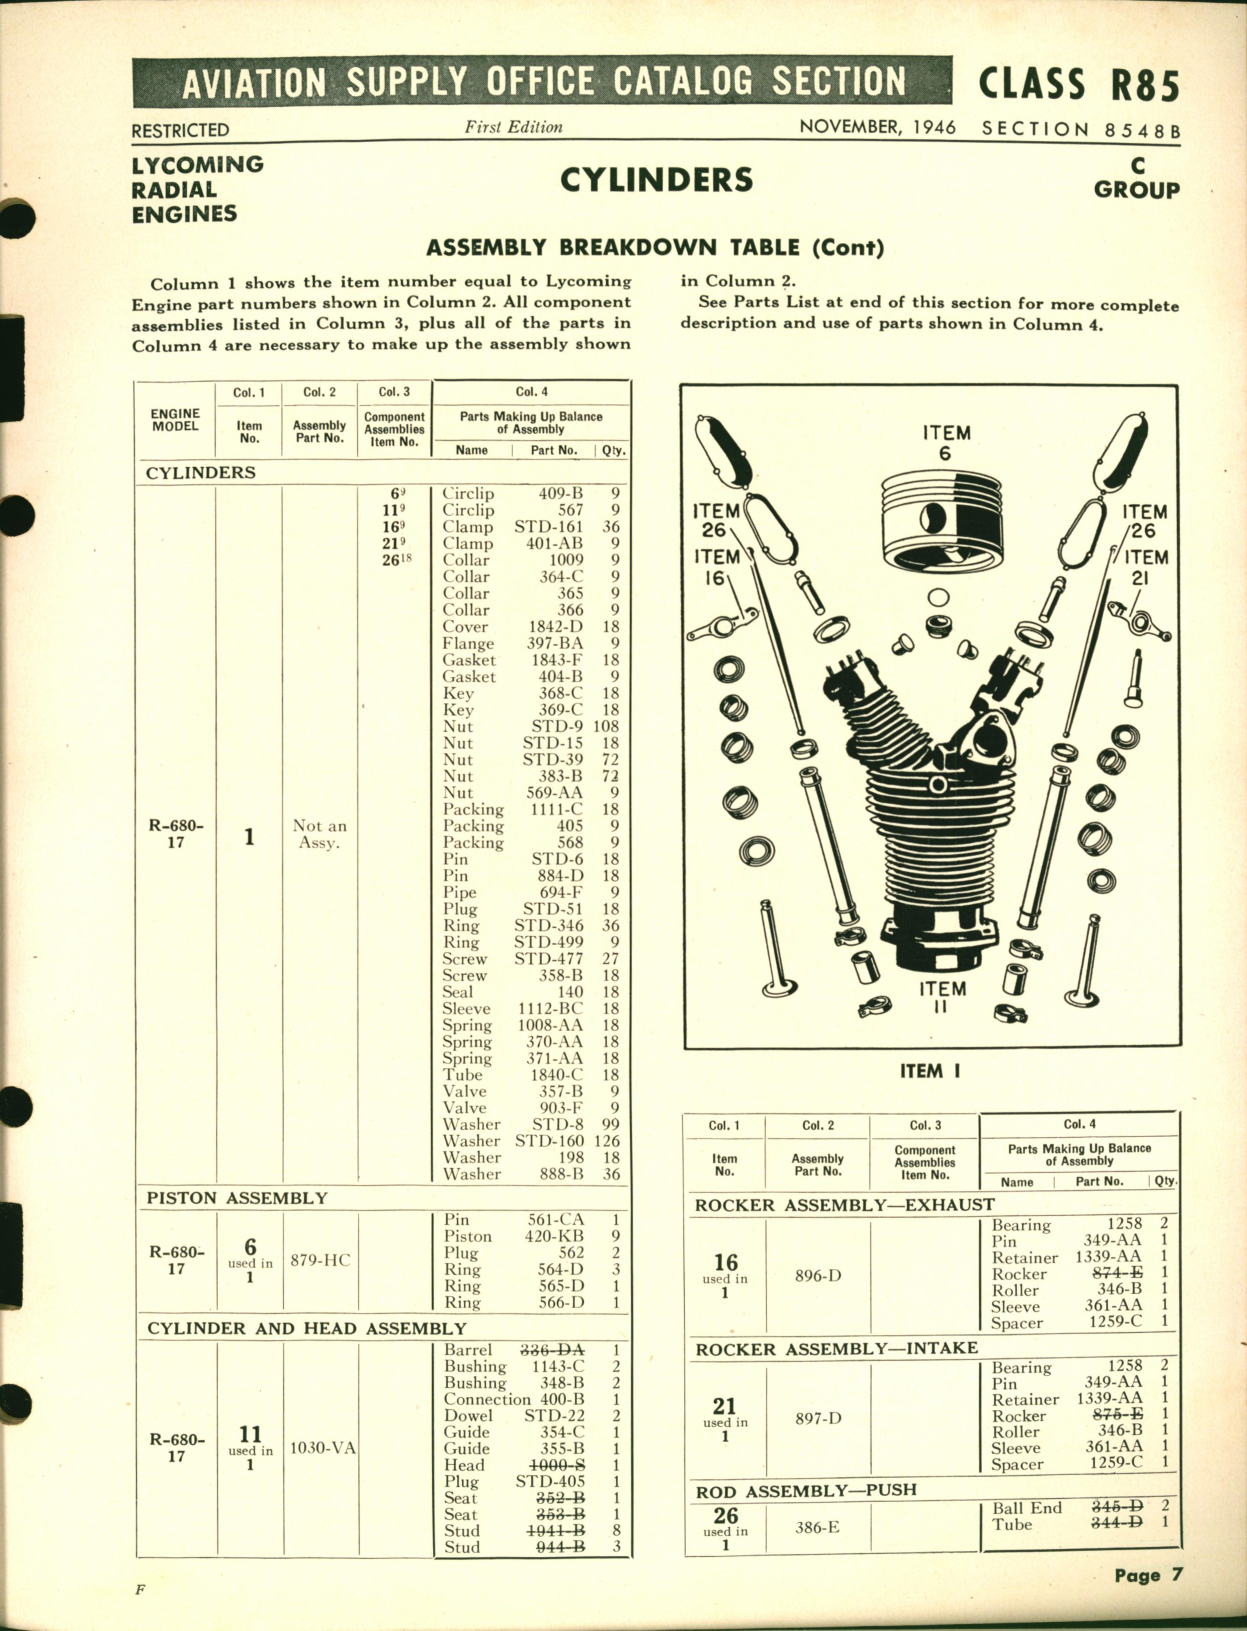 Sample page 7 from AirCorps Library document: Lycoming Engine Spare Parts for R-680-17  (Radial)